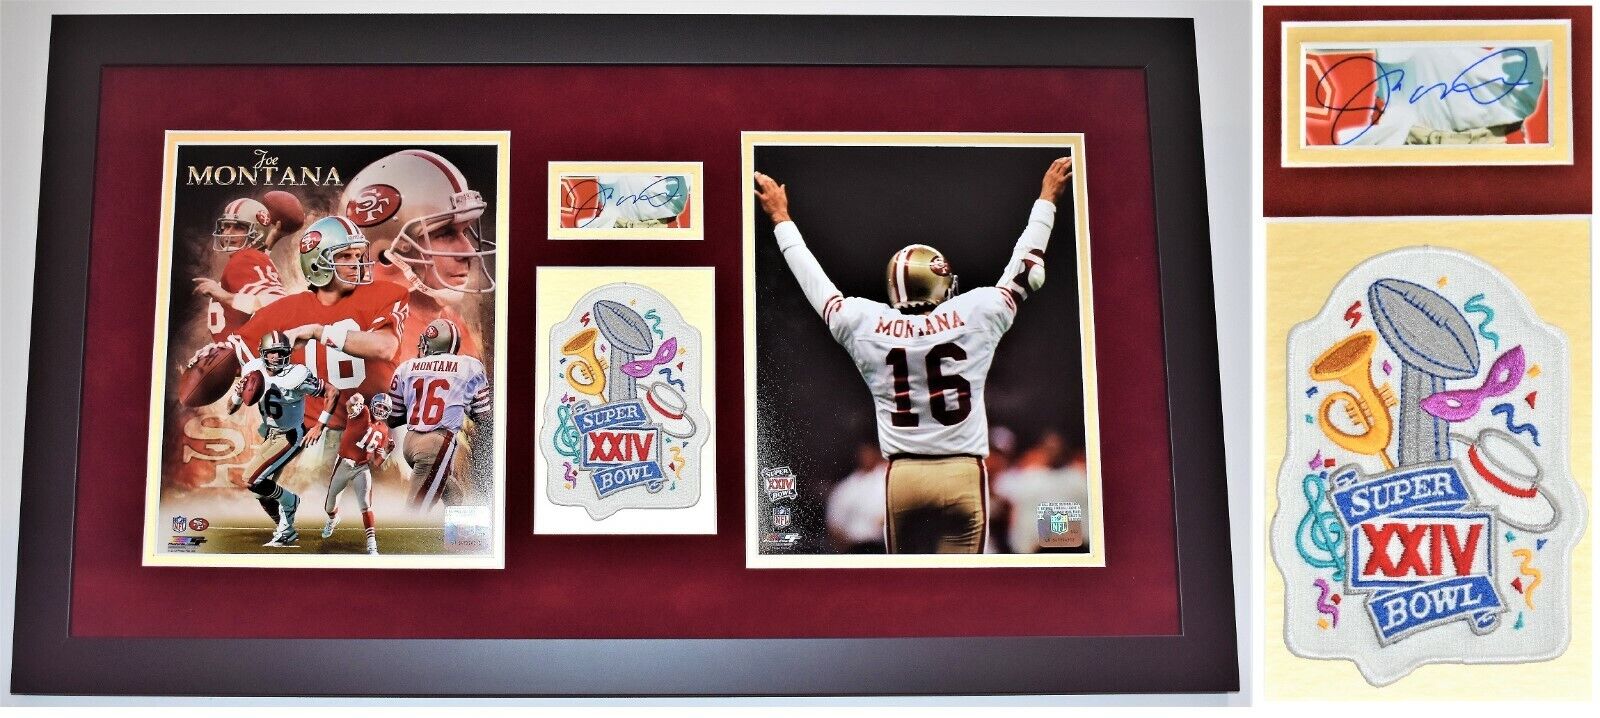 Joe Montana Signed Autographed Photo Poster painting 49ers Super Bowl XXIV Patch Framed PSA/DNA